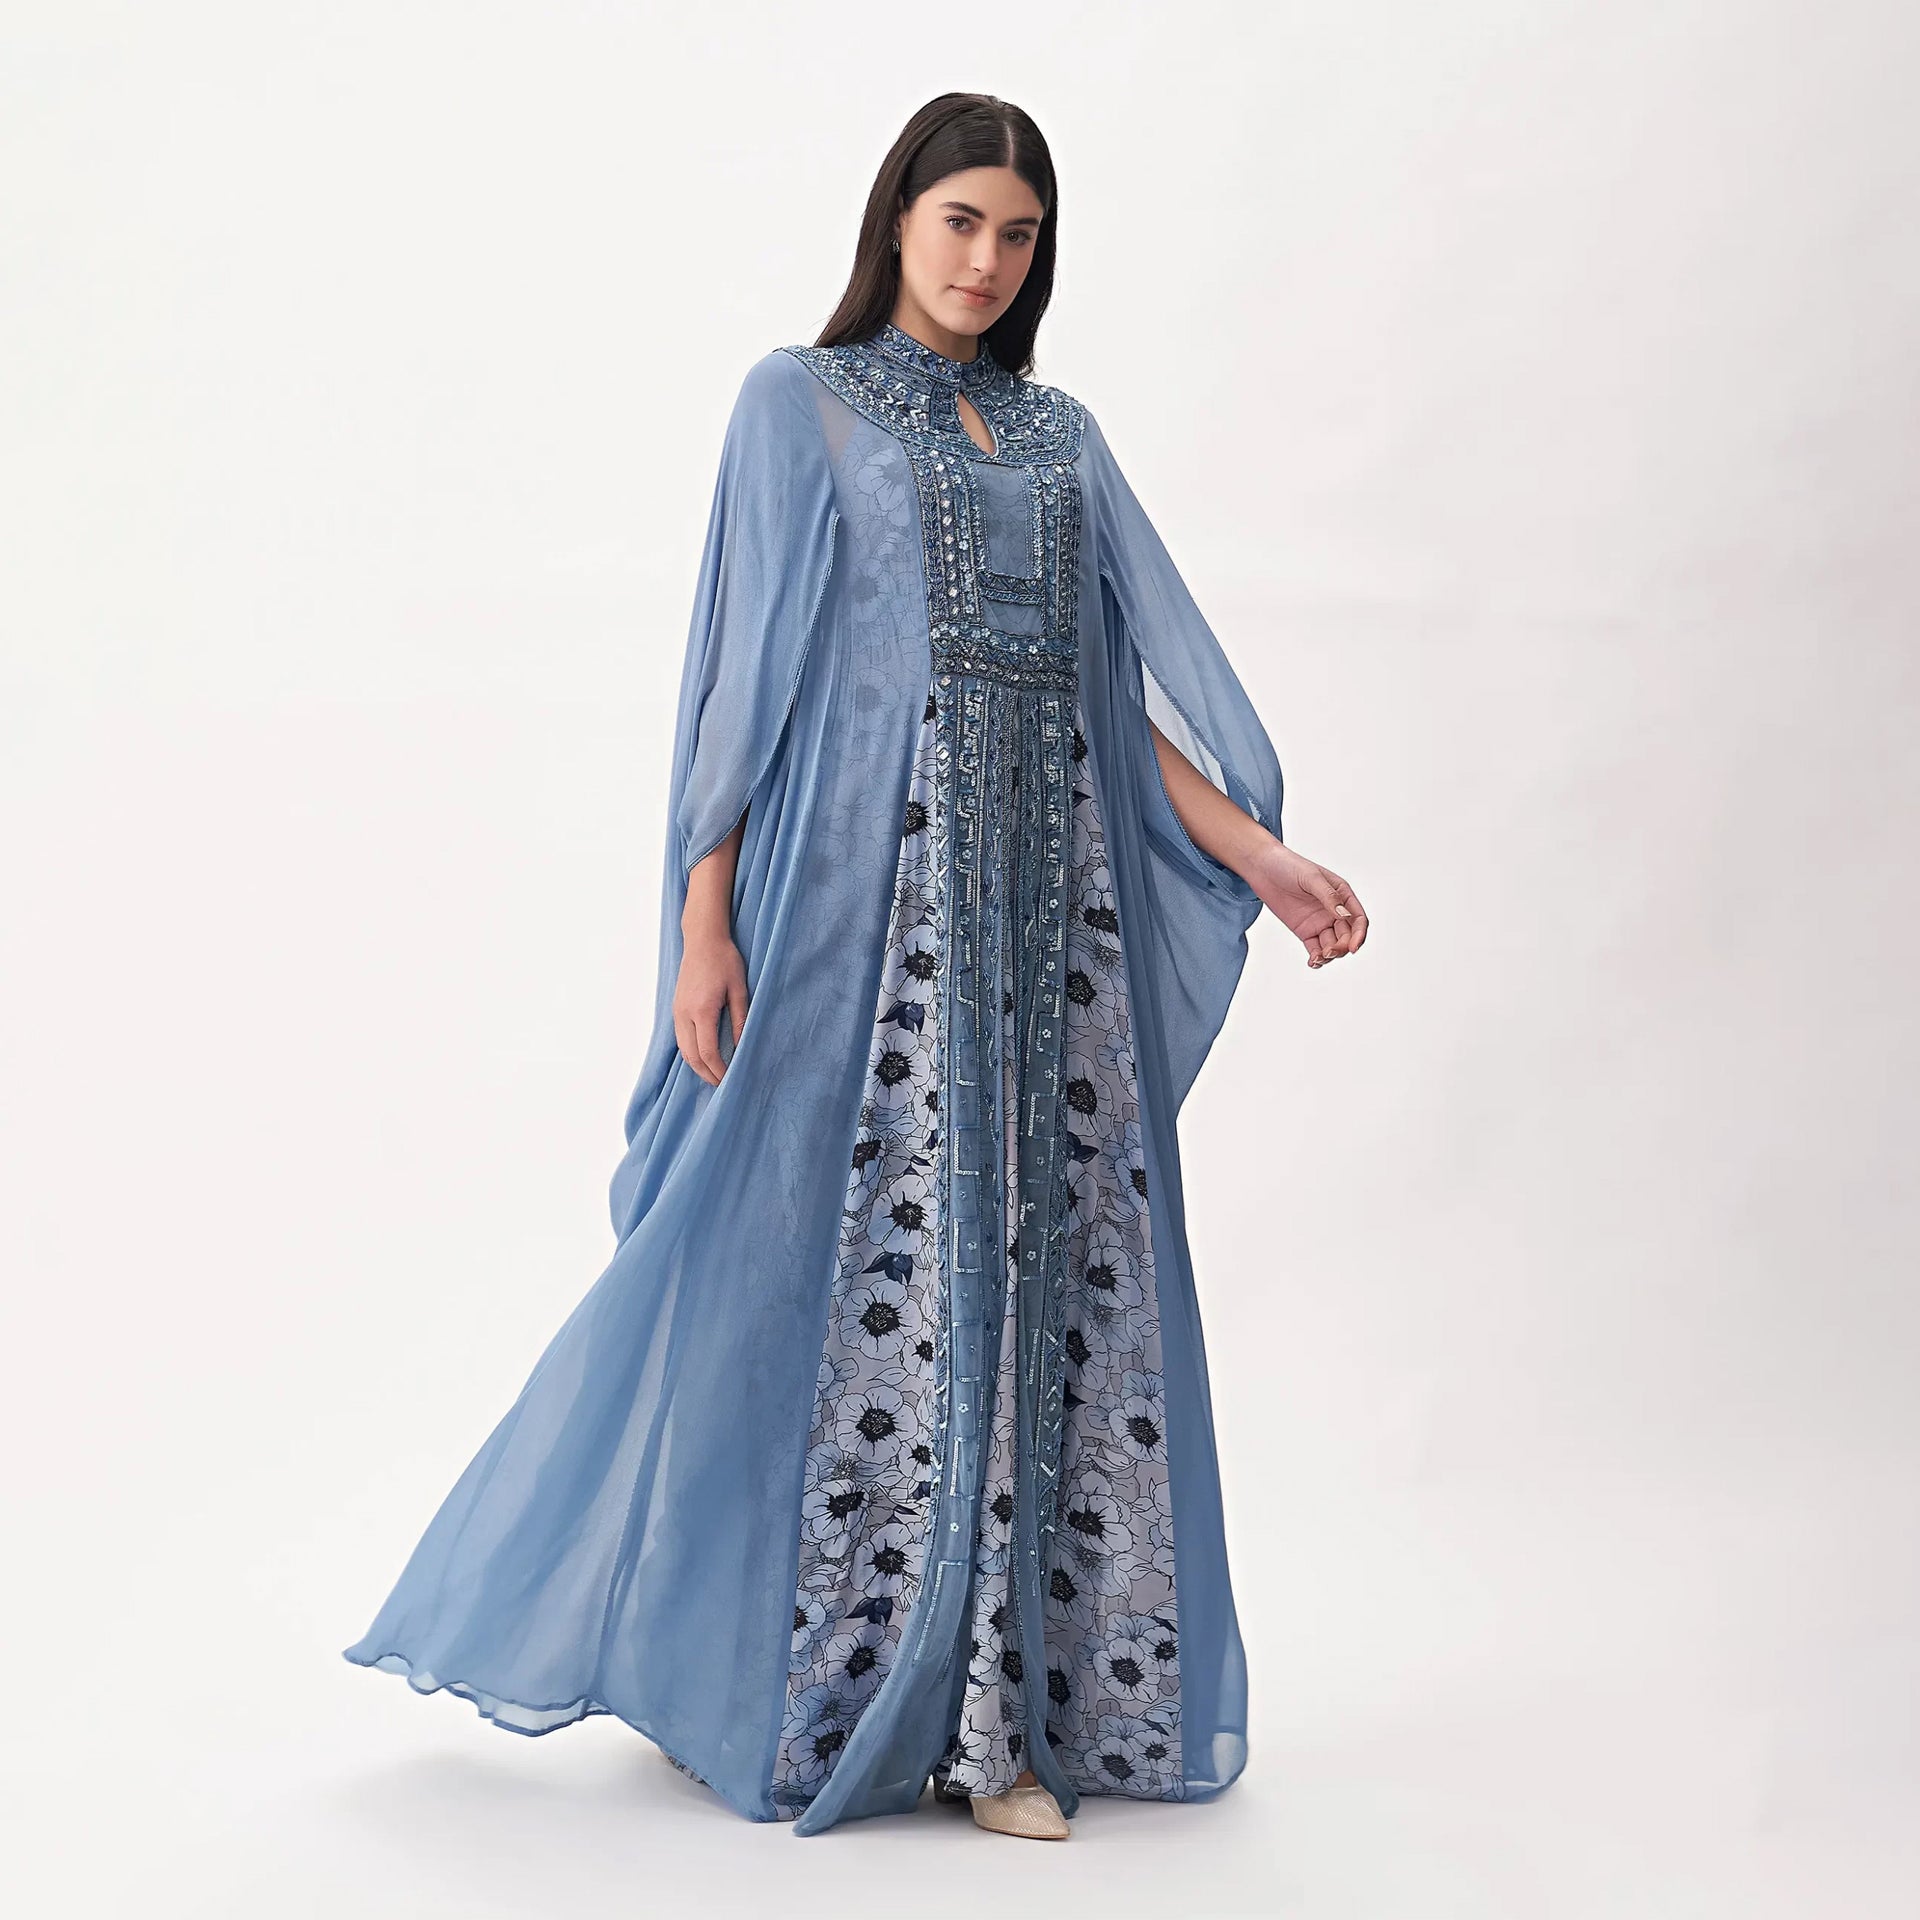 Light Blue Adele Dress with Silver Embroidery and Cape From Shalky